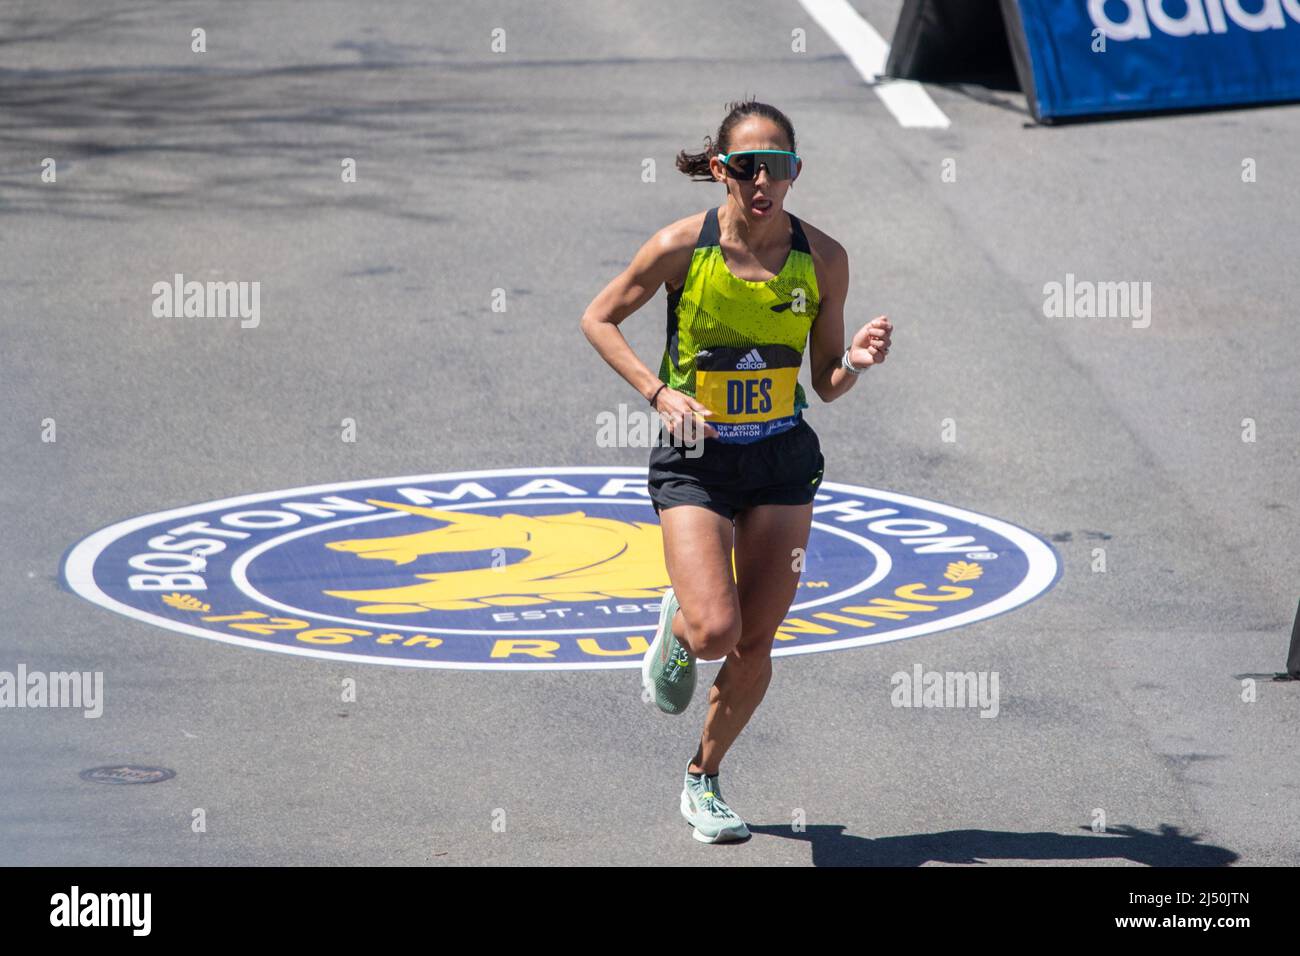 BOSTON, MA APRIL 18 Desiree Linden of the United States of America